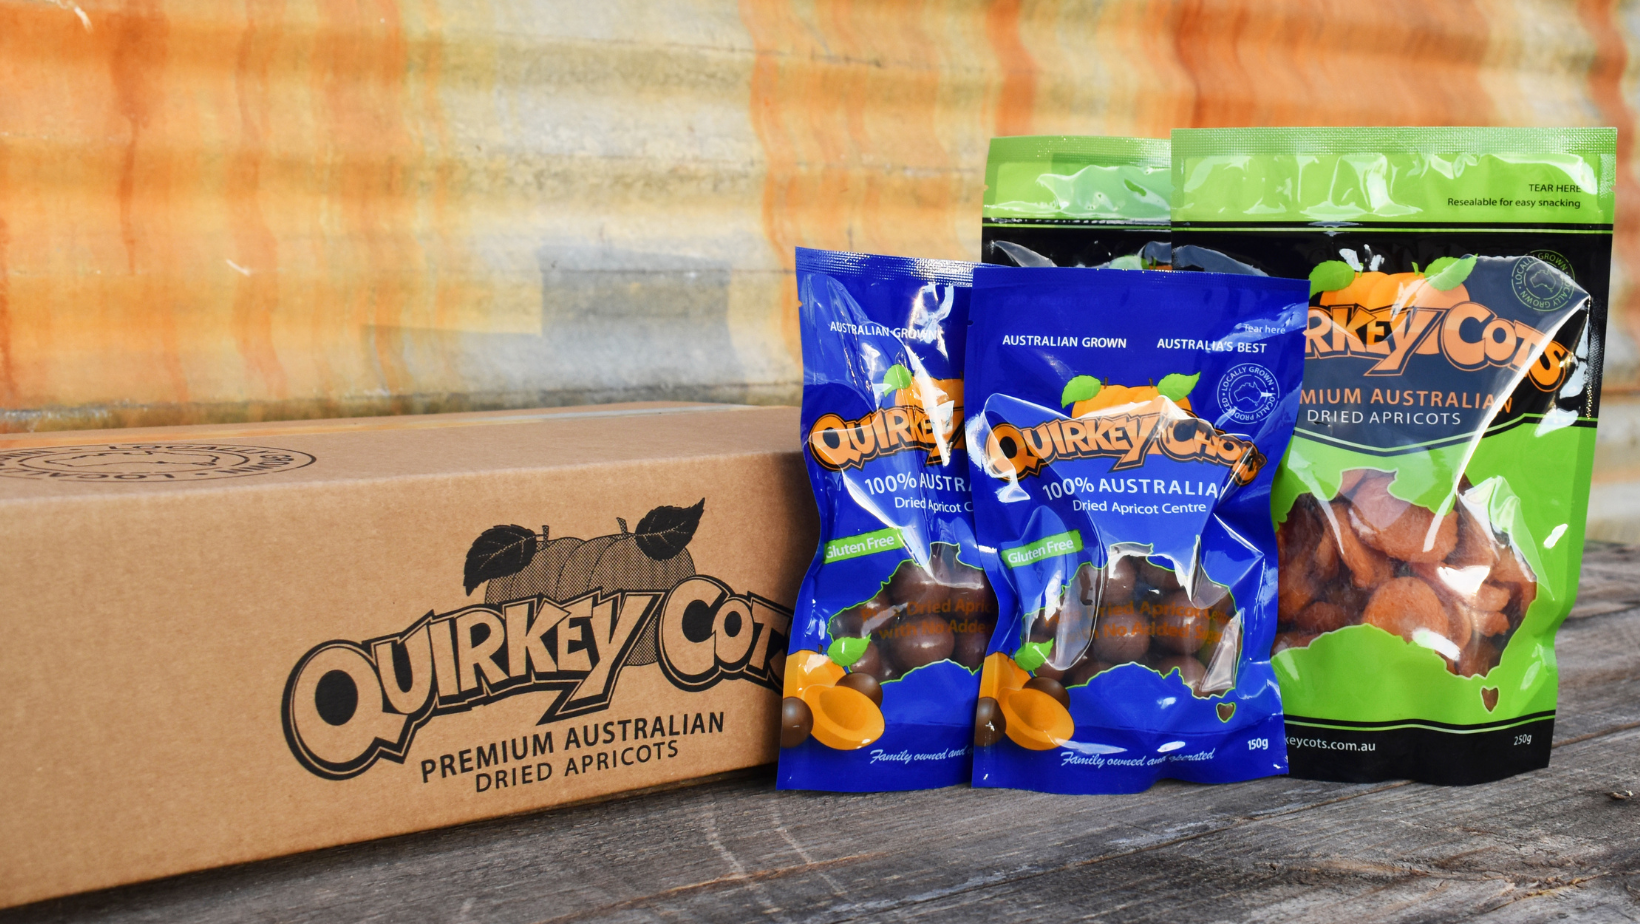 Apricots and chocolate from Quirkey Cots